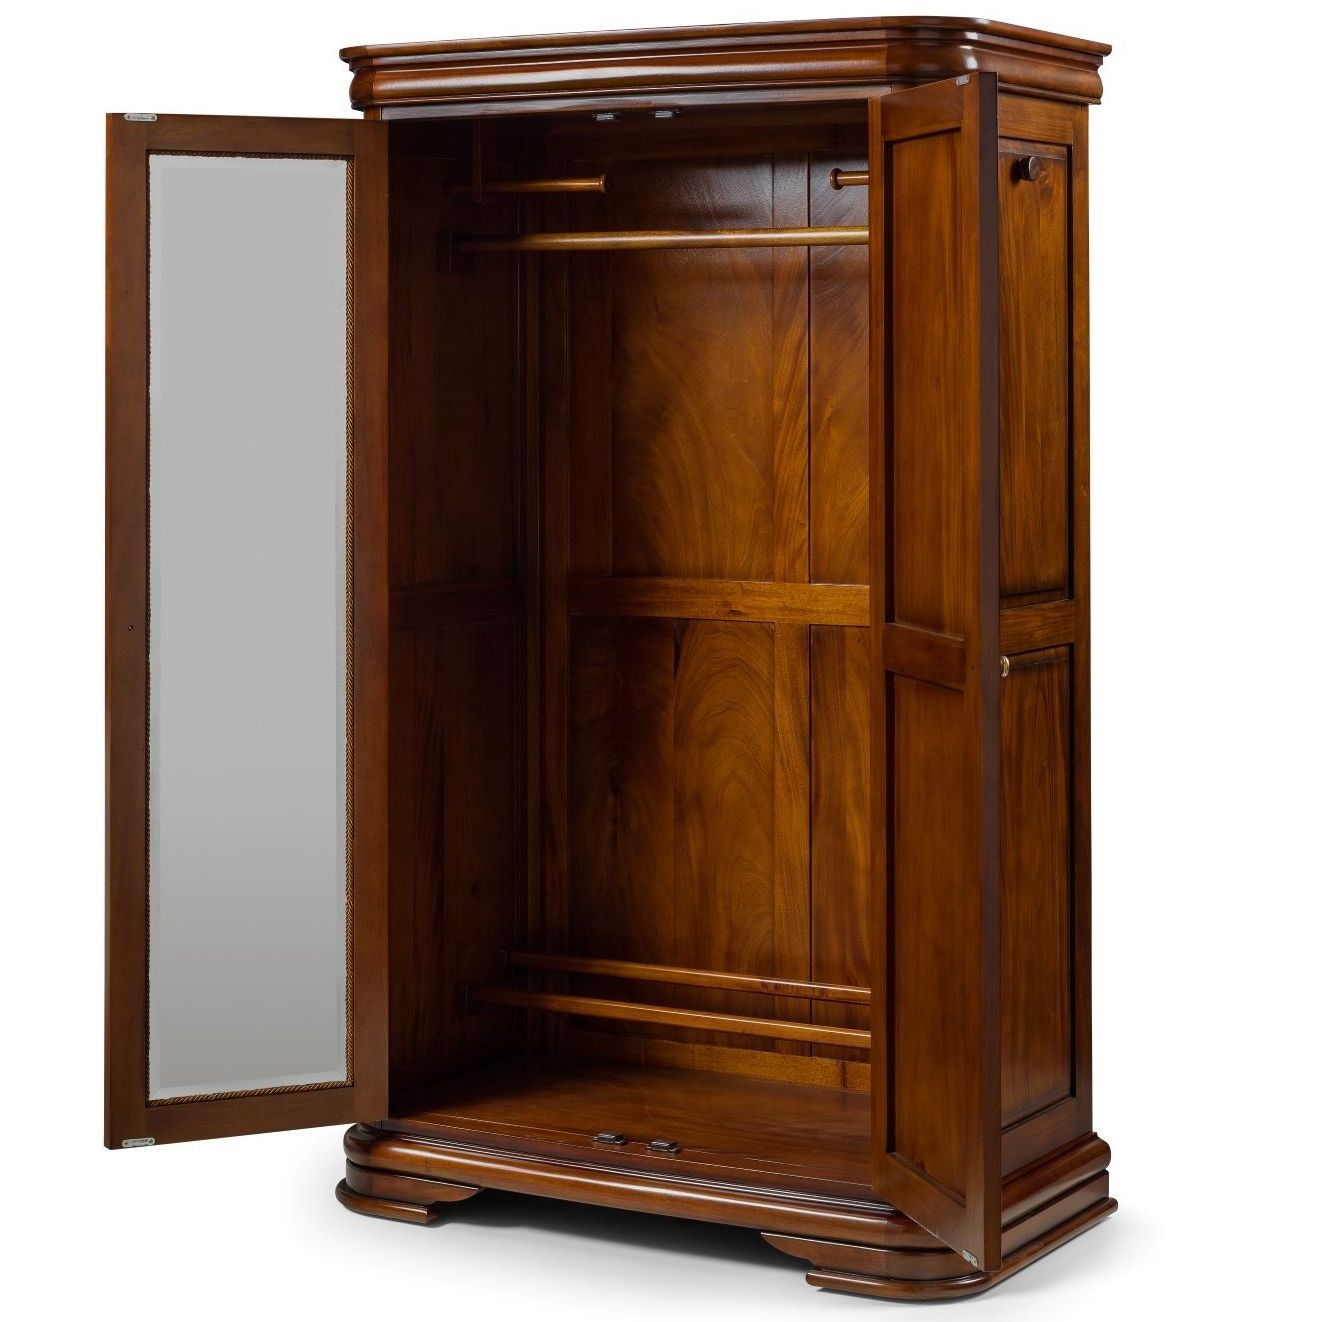 Mahogany Wardrobes In 2017 Antoinette French Sleigh Double Wardrobe (View 9 of 10)